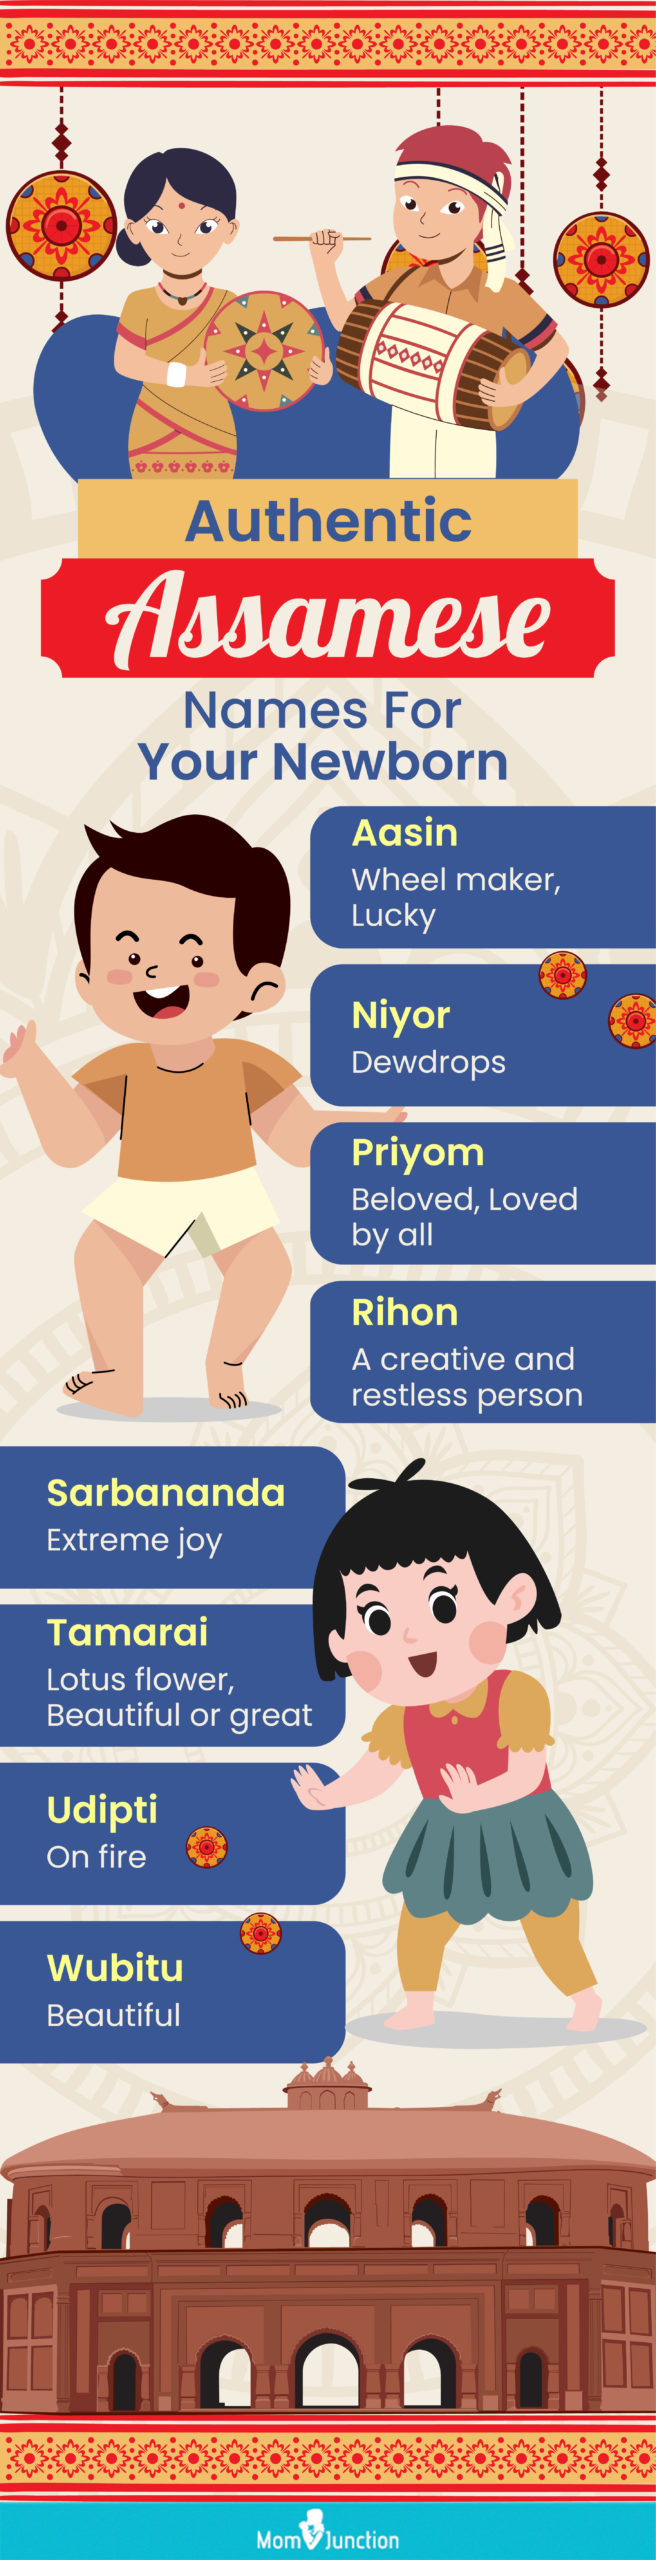 authentic assamese names for your newborn (infographic)